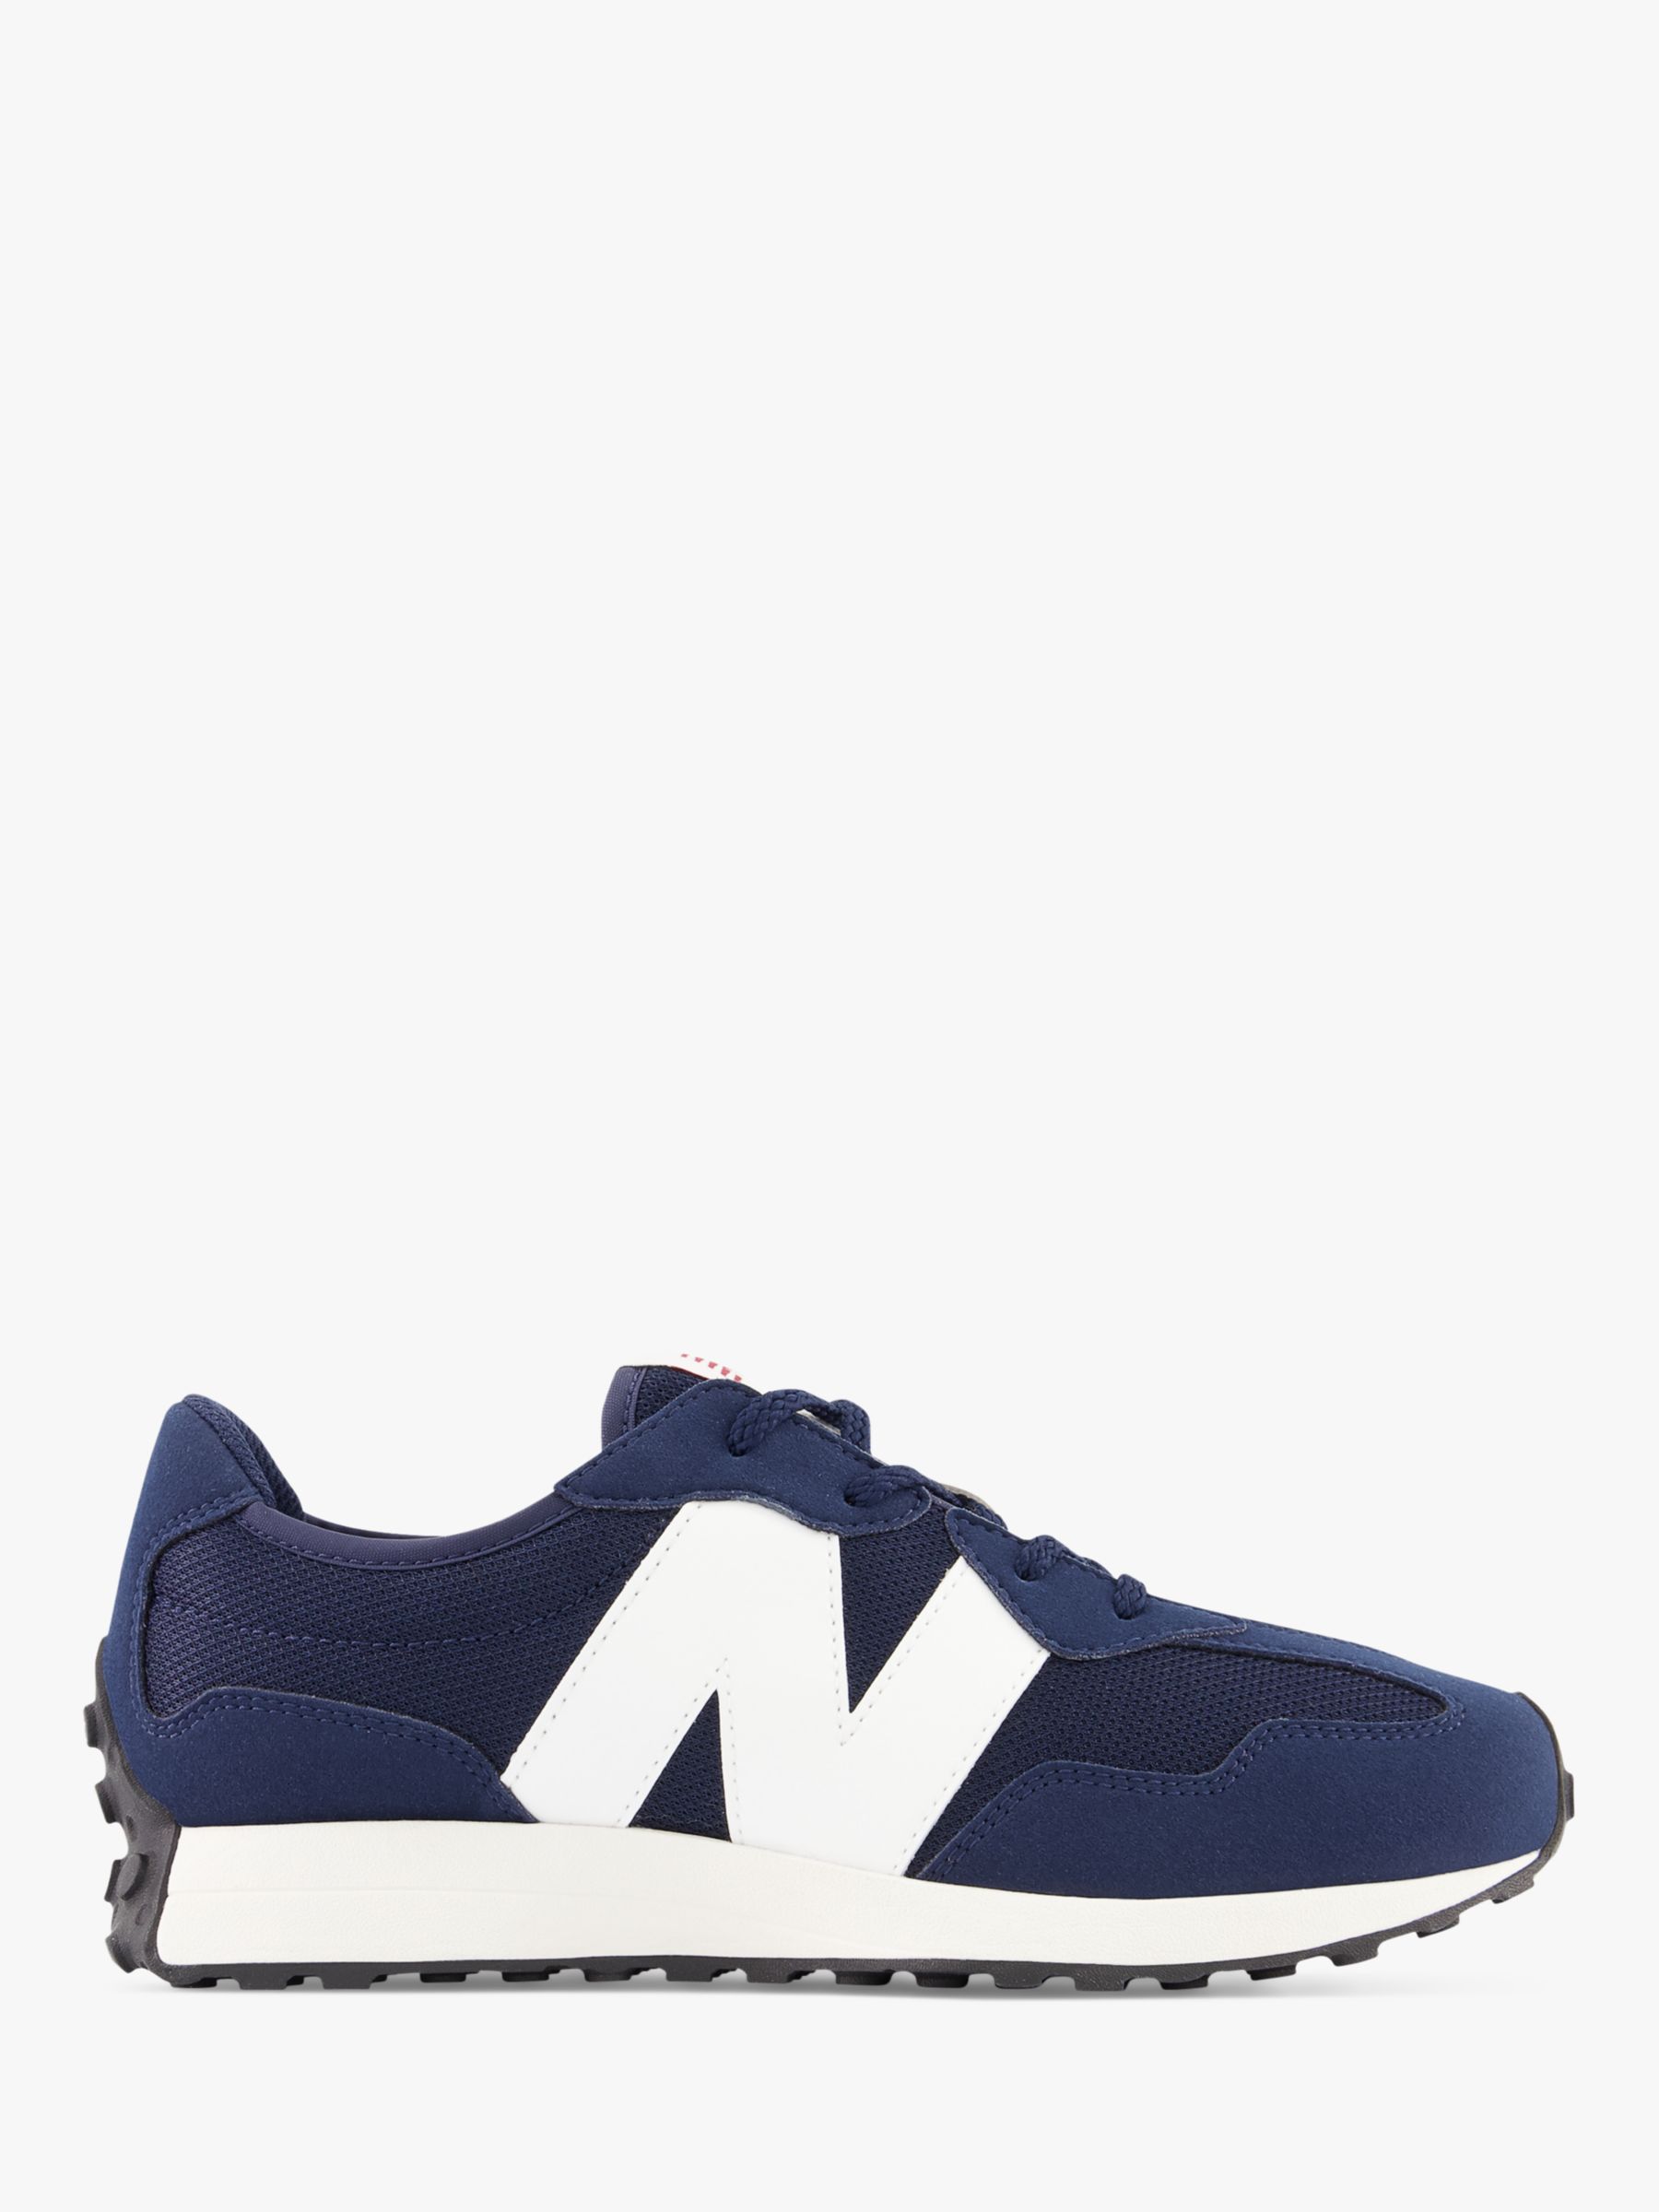 New Balance Kids' 327 Lace Up Trainers, Navy at John Lewis & Partners